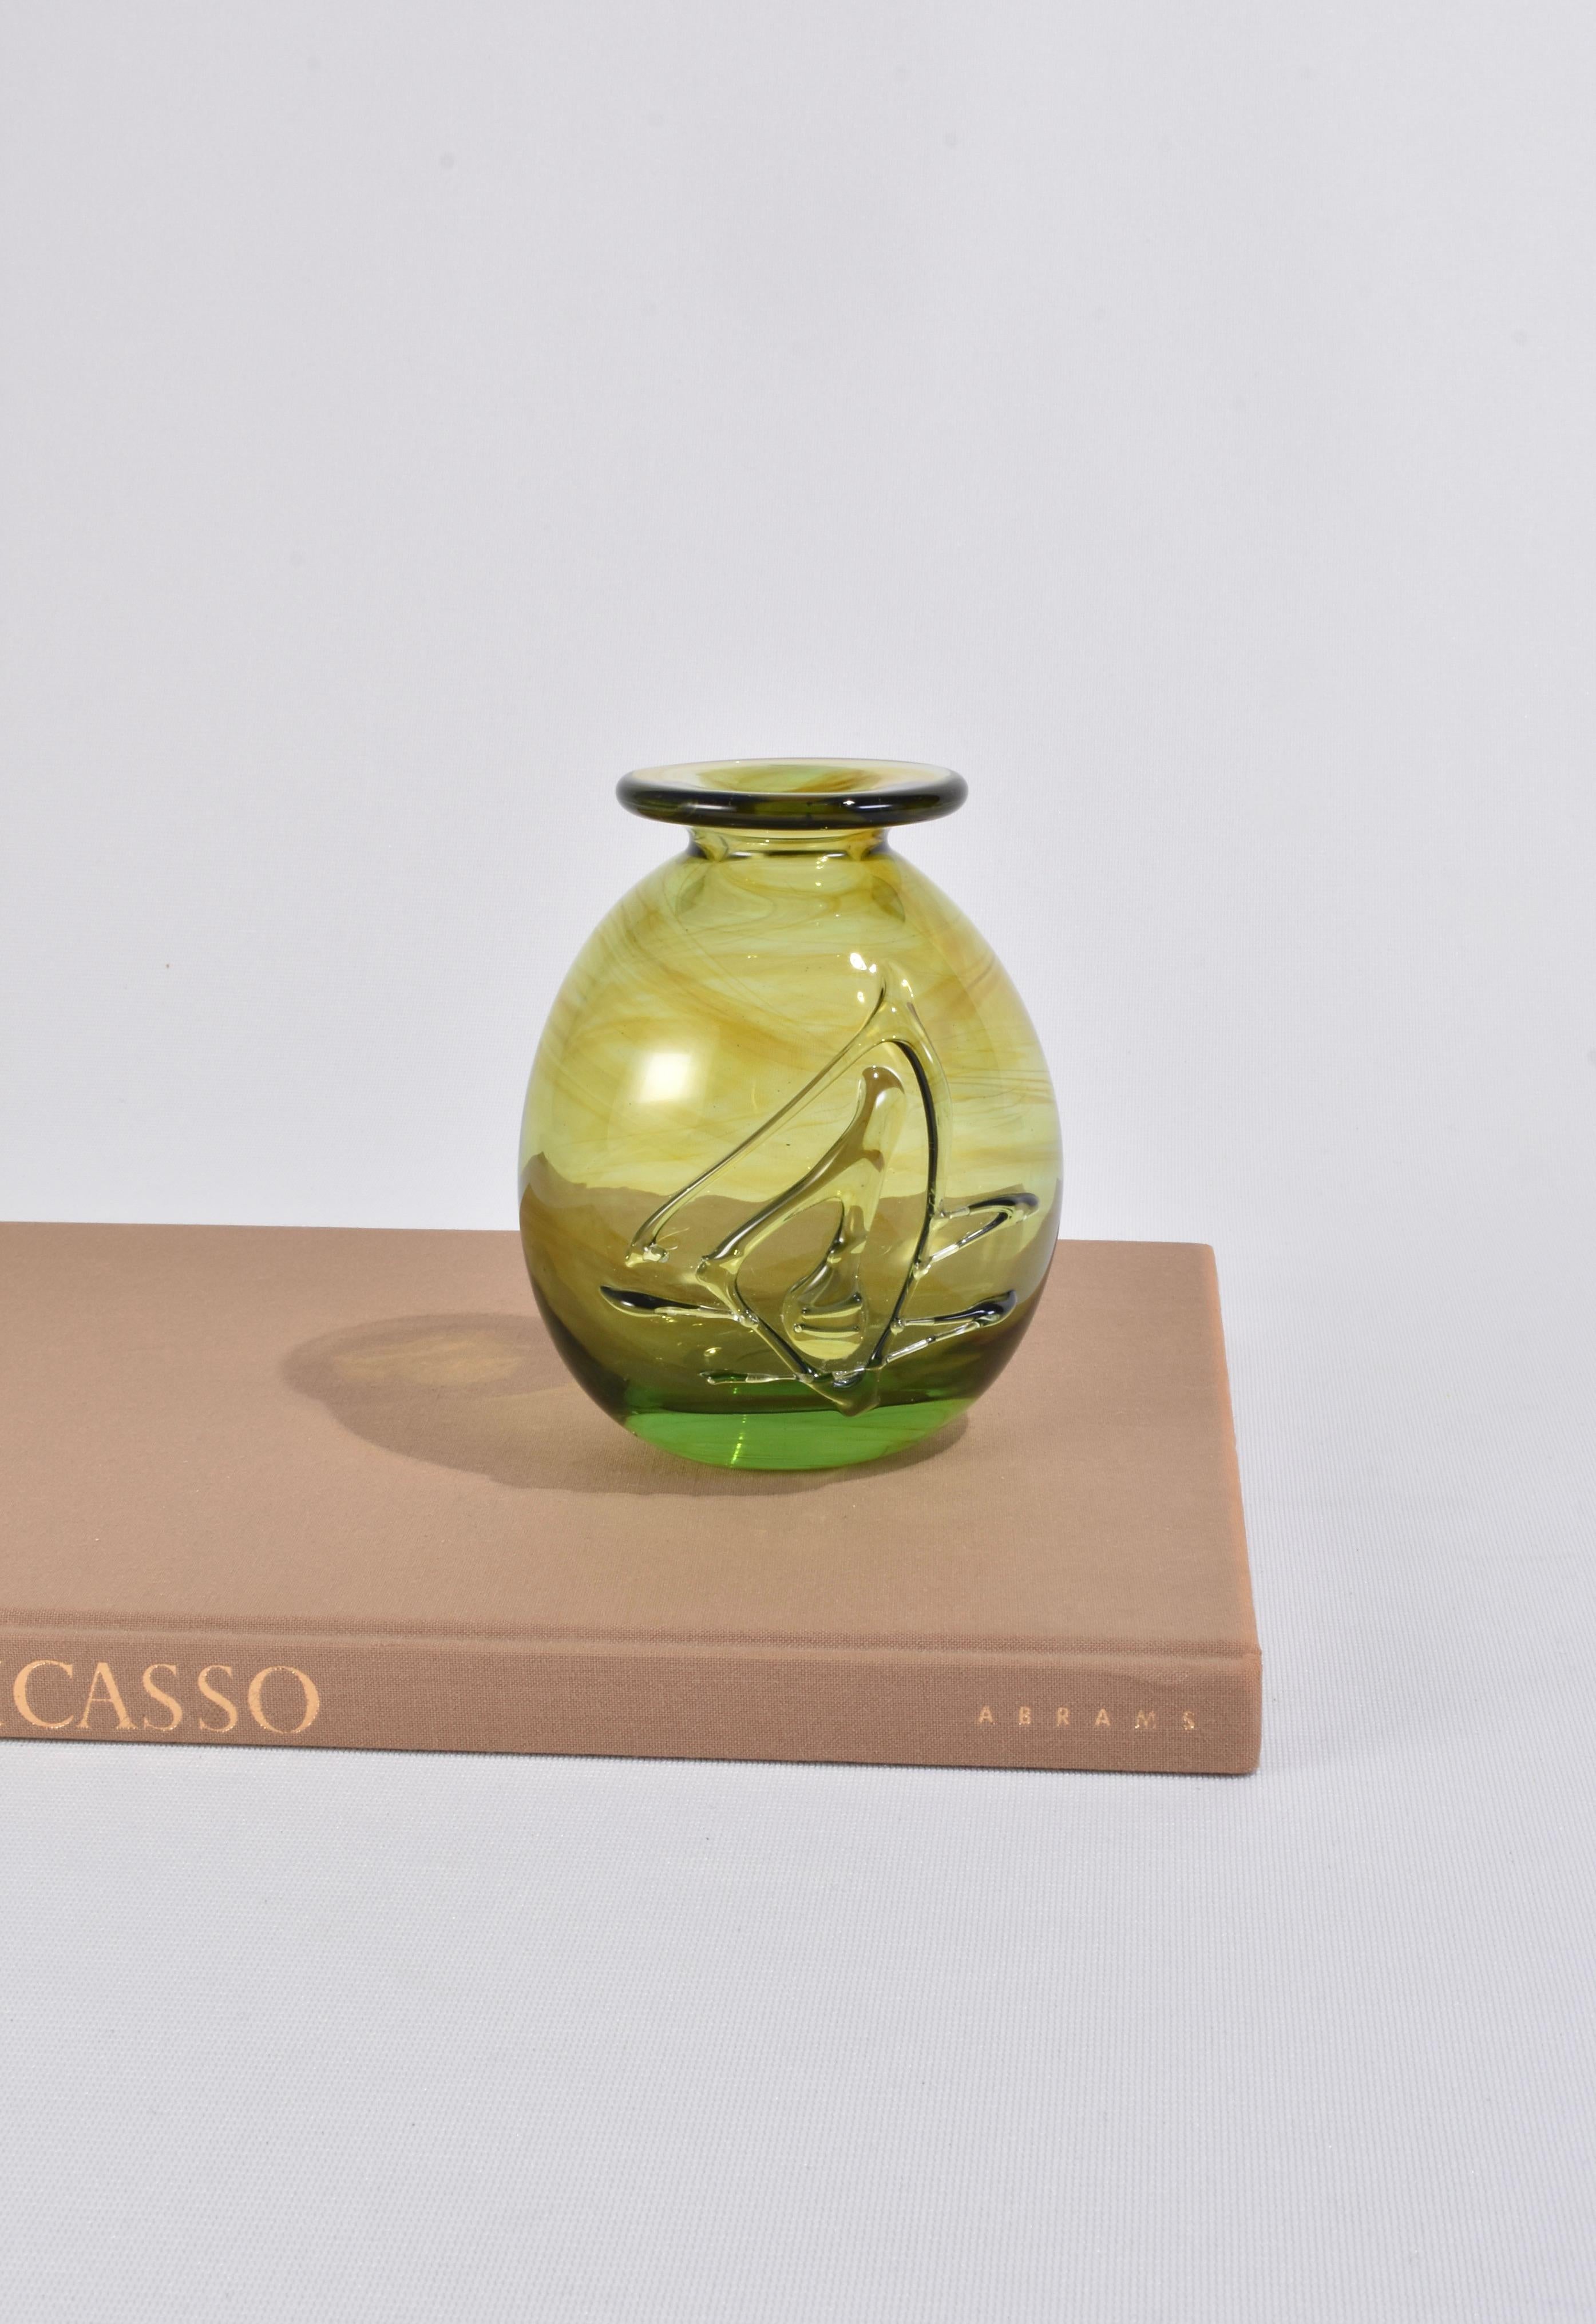 Stunning, olive green blown glass stem vase with an applied abstract design. Signed on base, William '83.